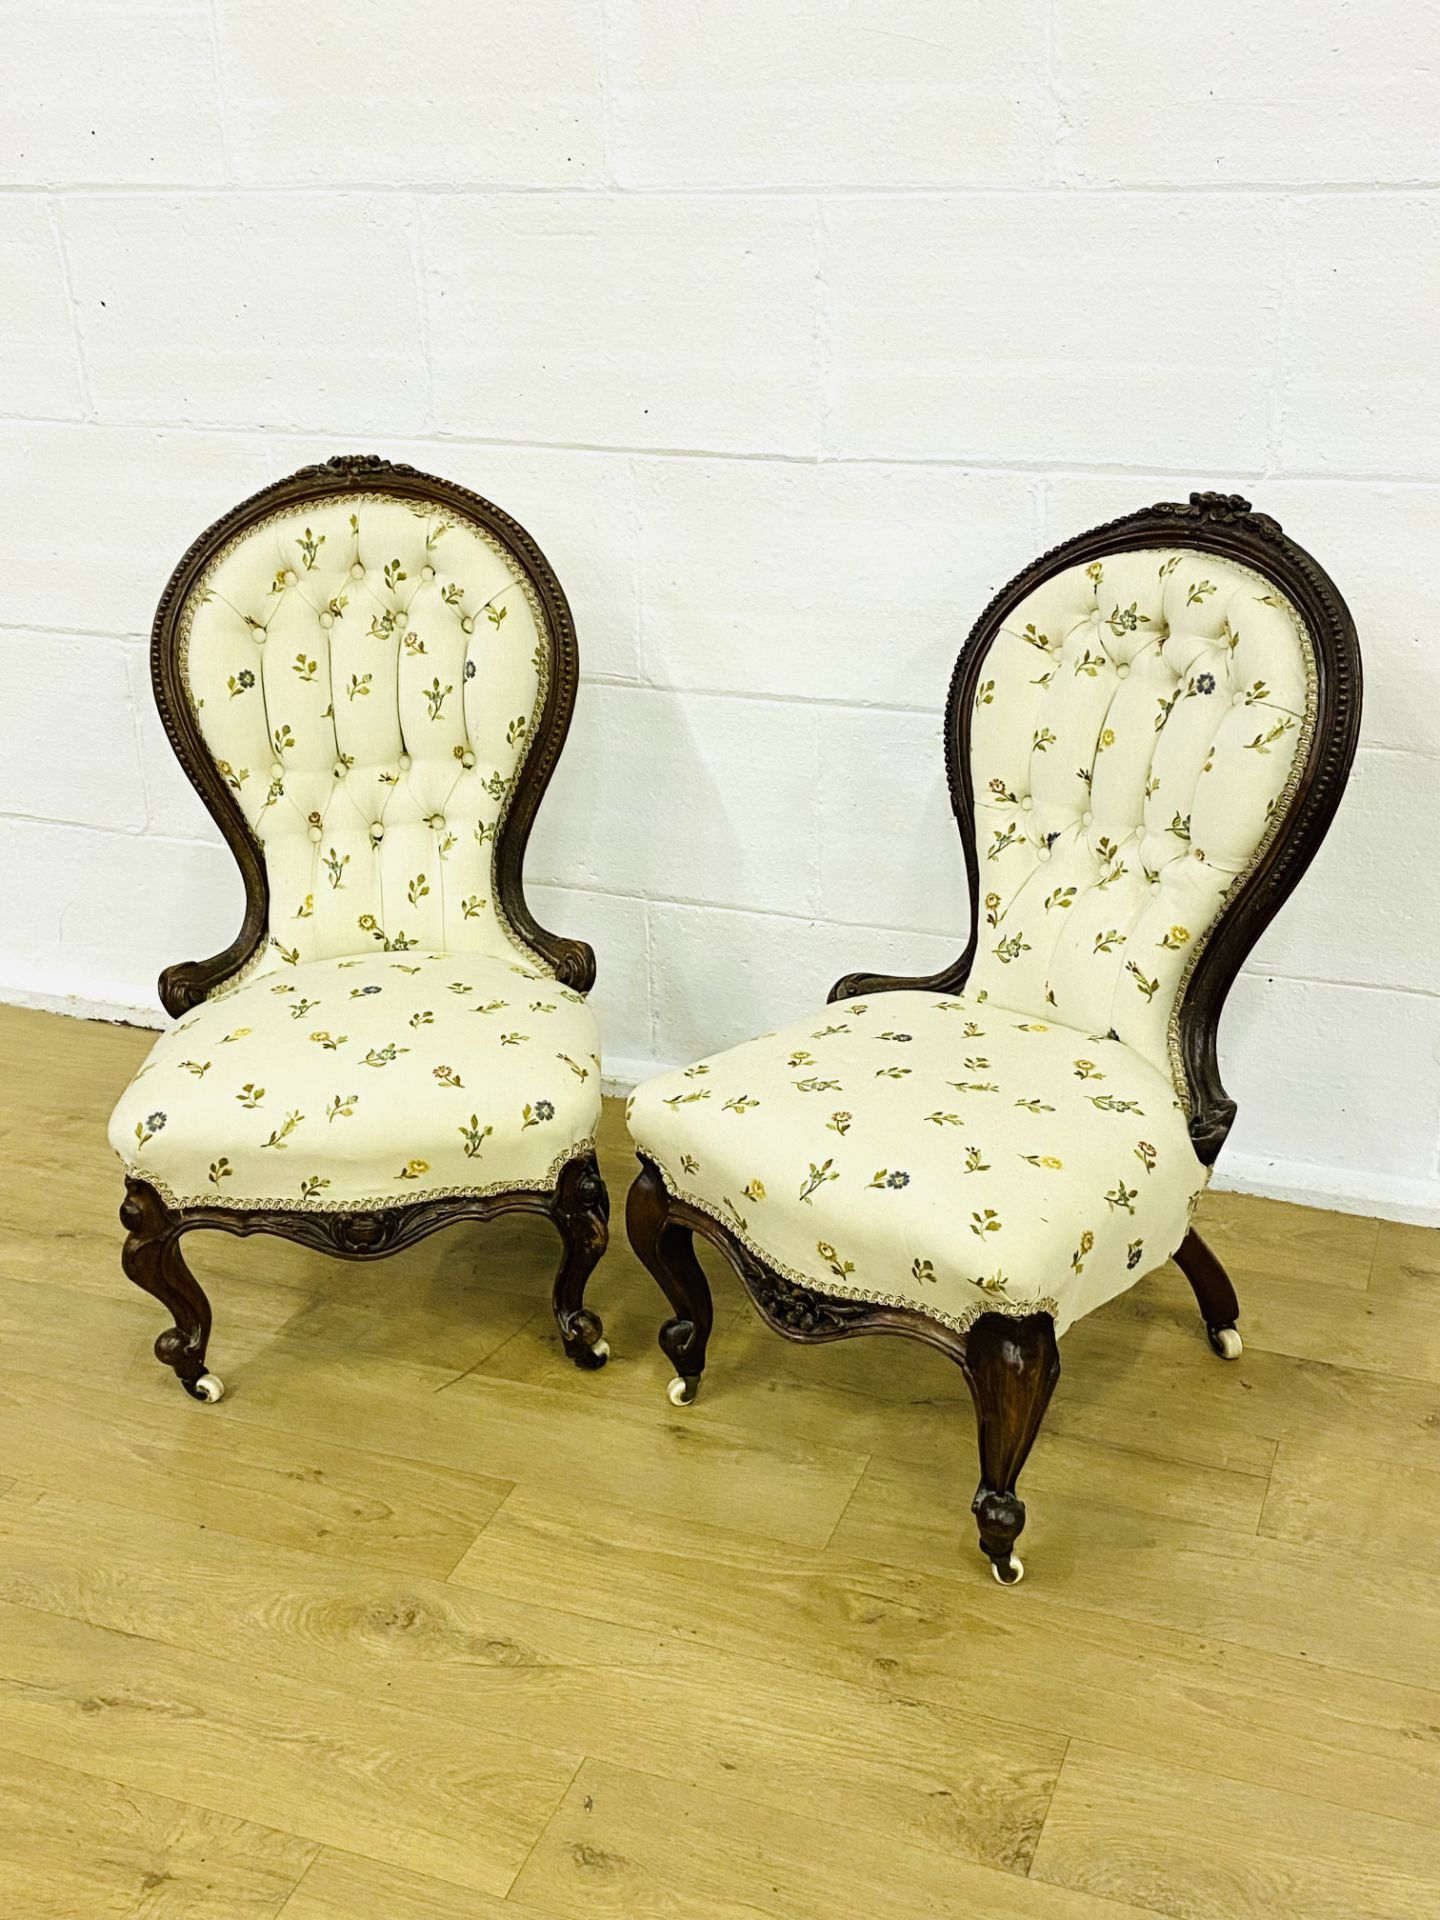 Pair of mahogany framed bedroom chairs - Image 3 of 8